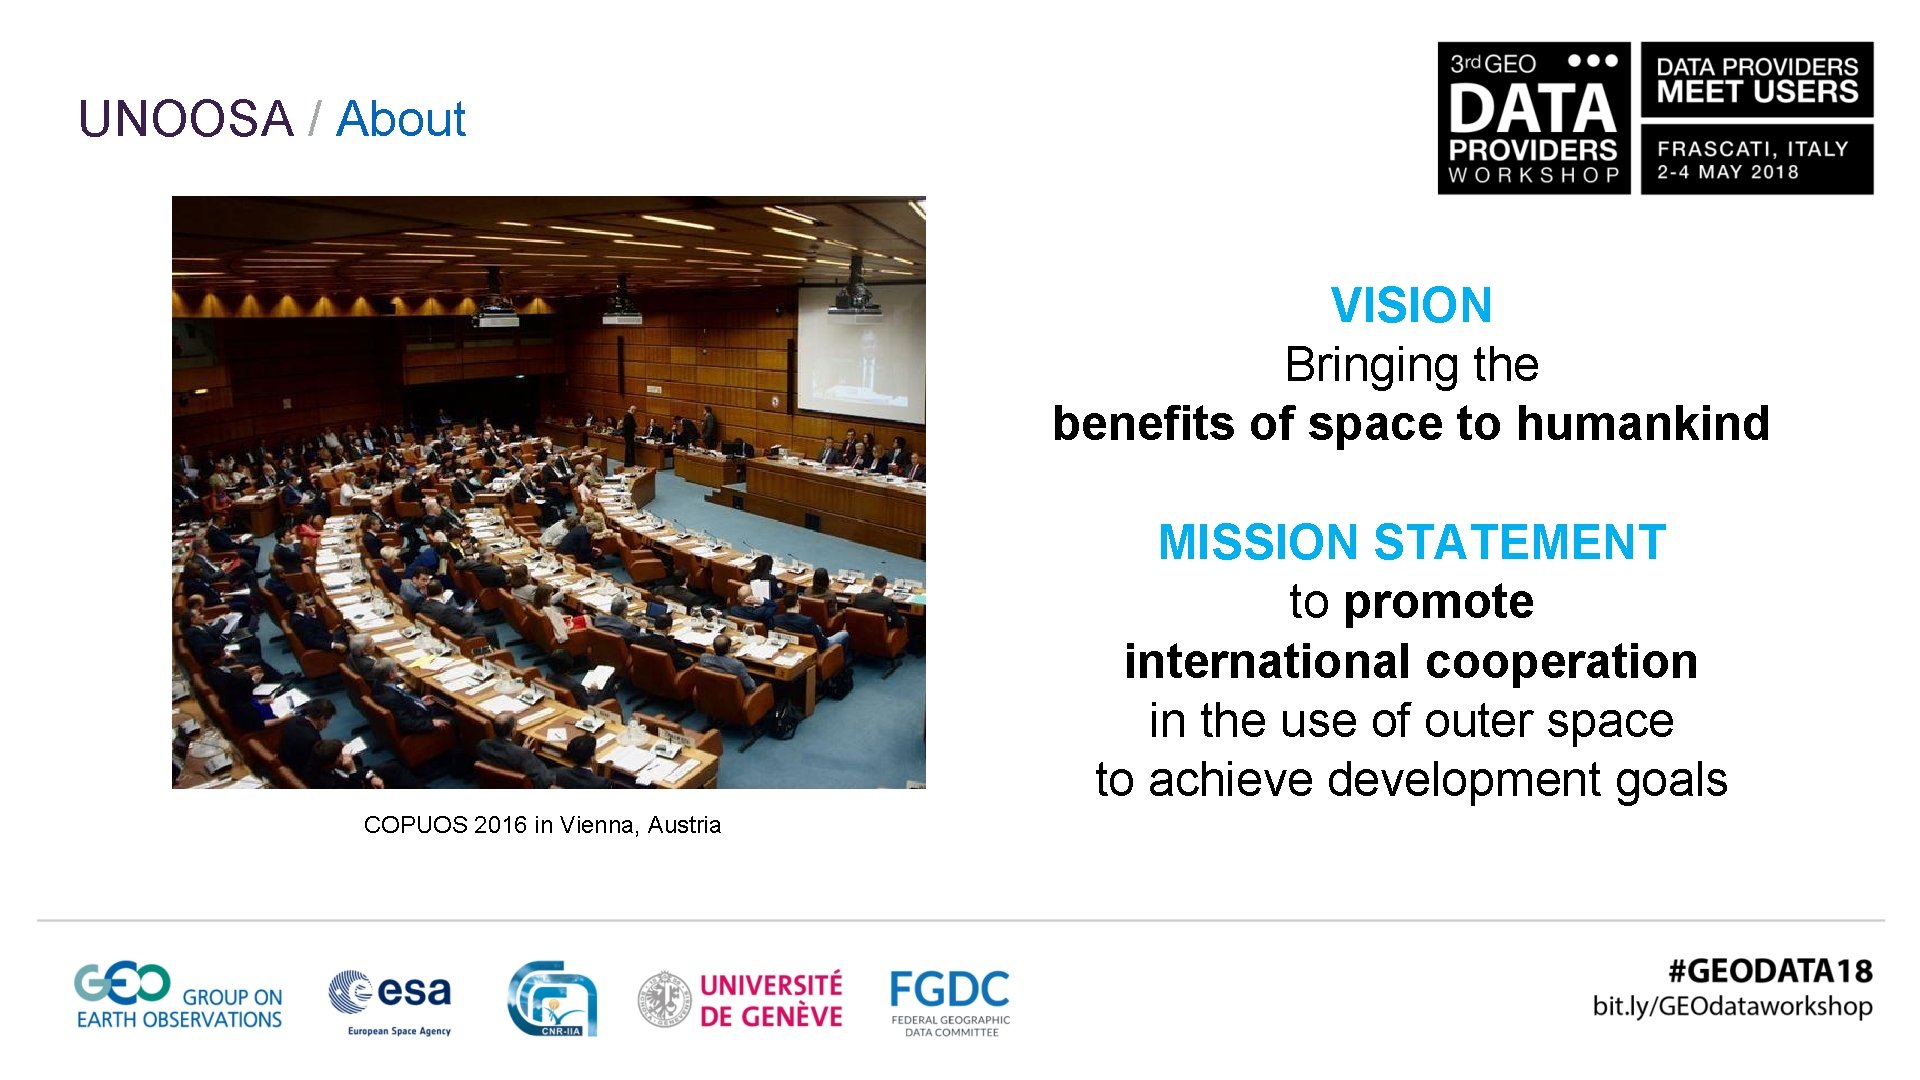 UNOOSA / About VISION Bringing the benefits of space to humankind MISSION STATEMENT to